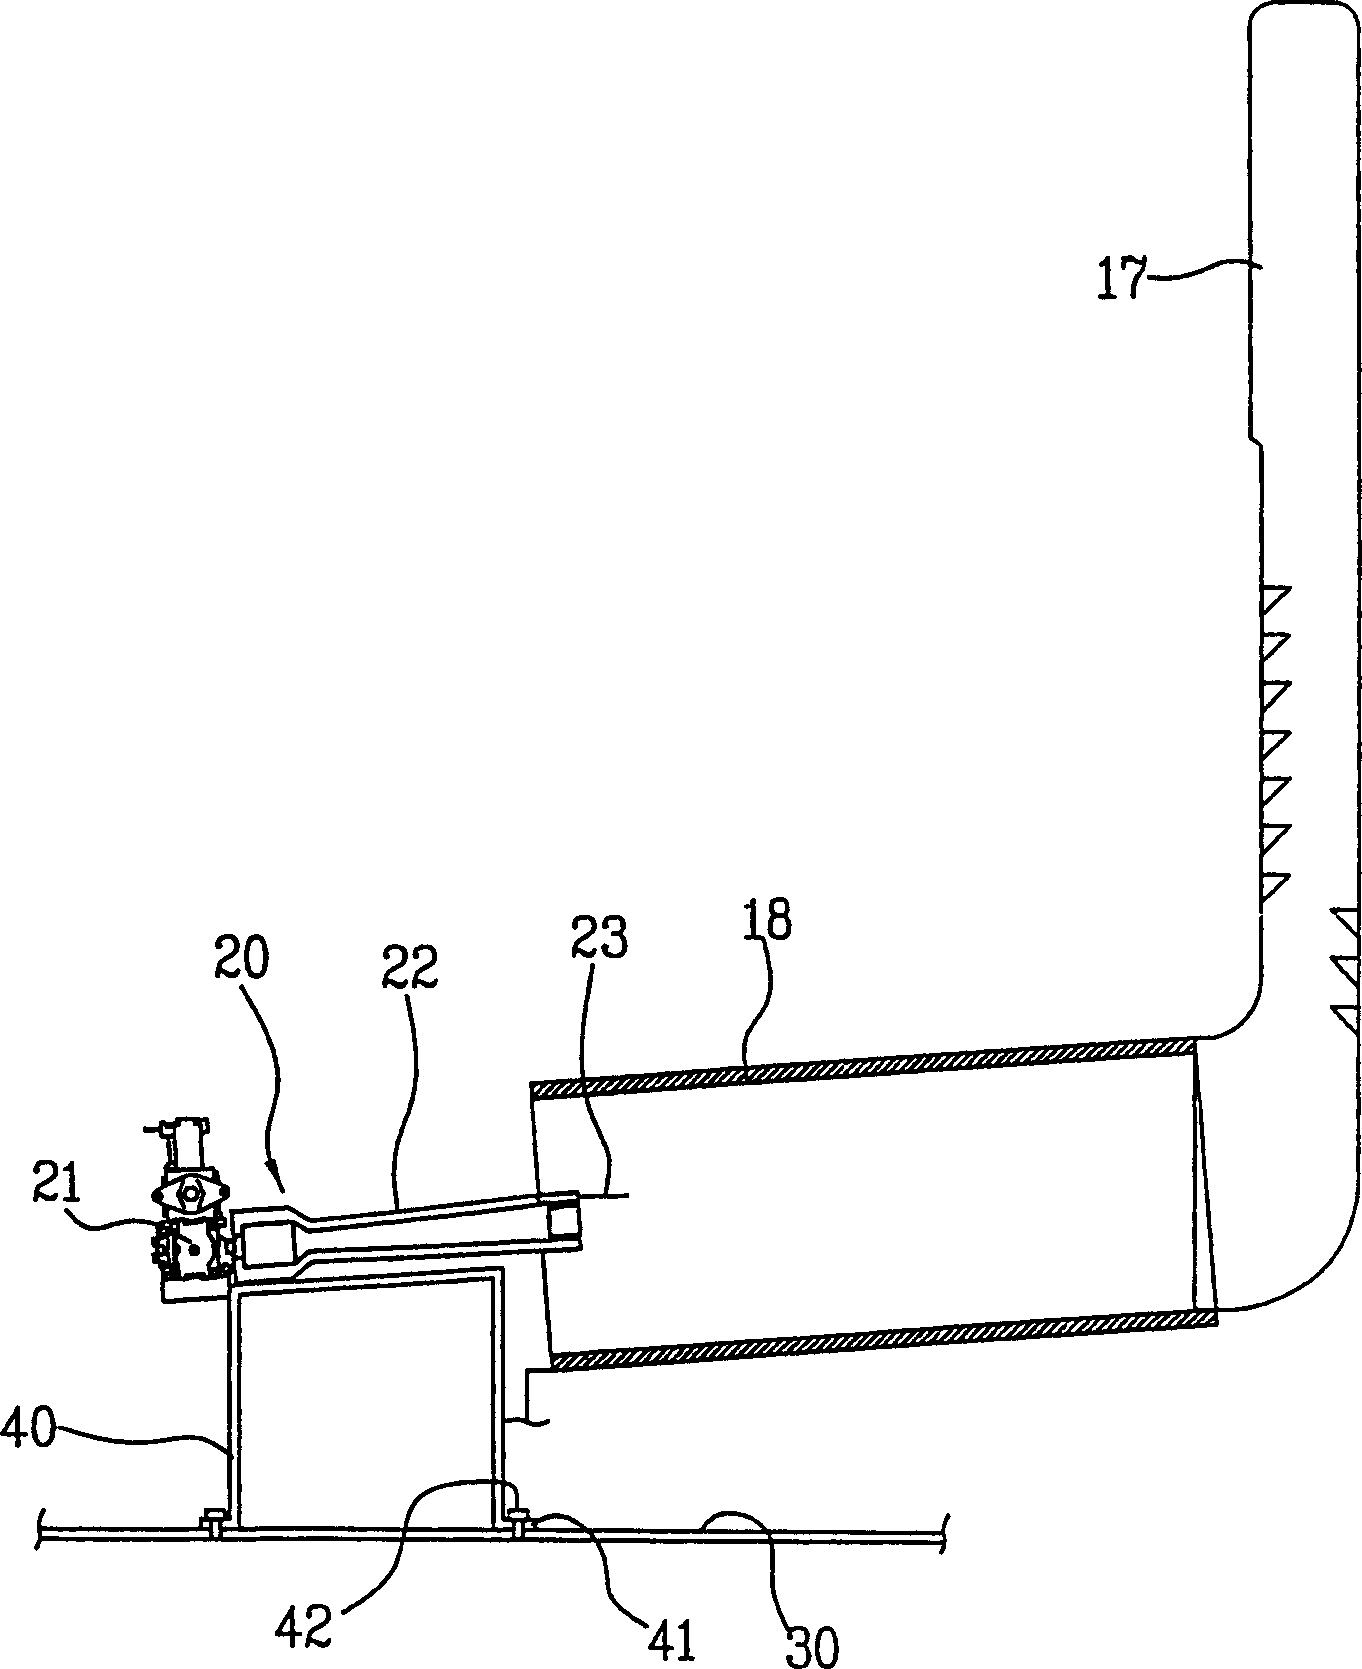 Apparatus for supporting burner of drier